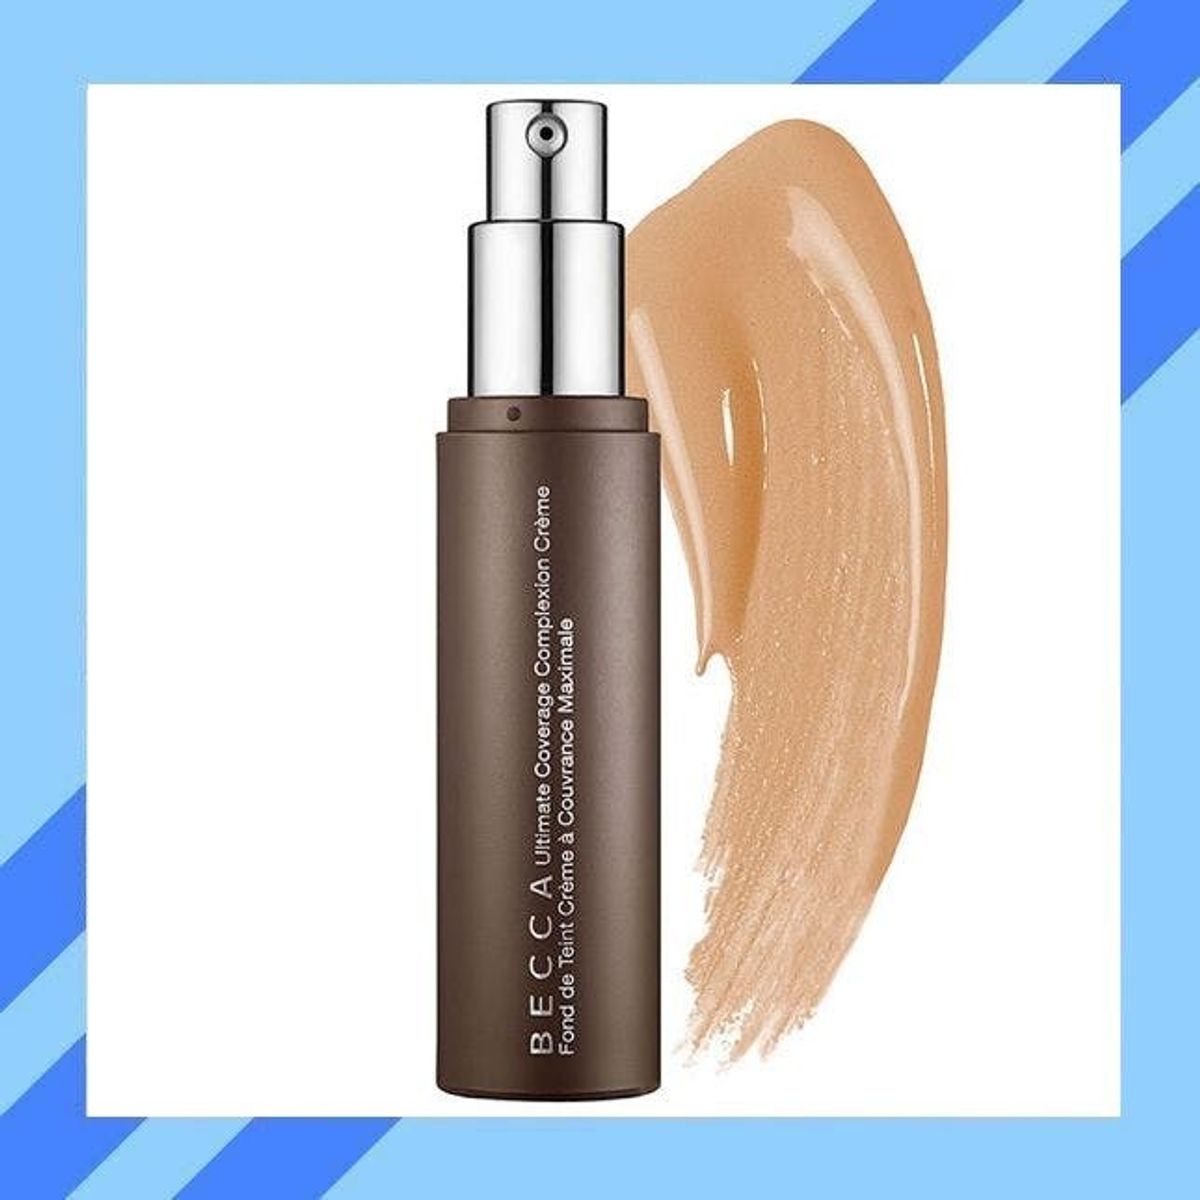 11 Inclusive Foundation Brands to Match the Trickiest of Skin Tones